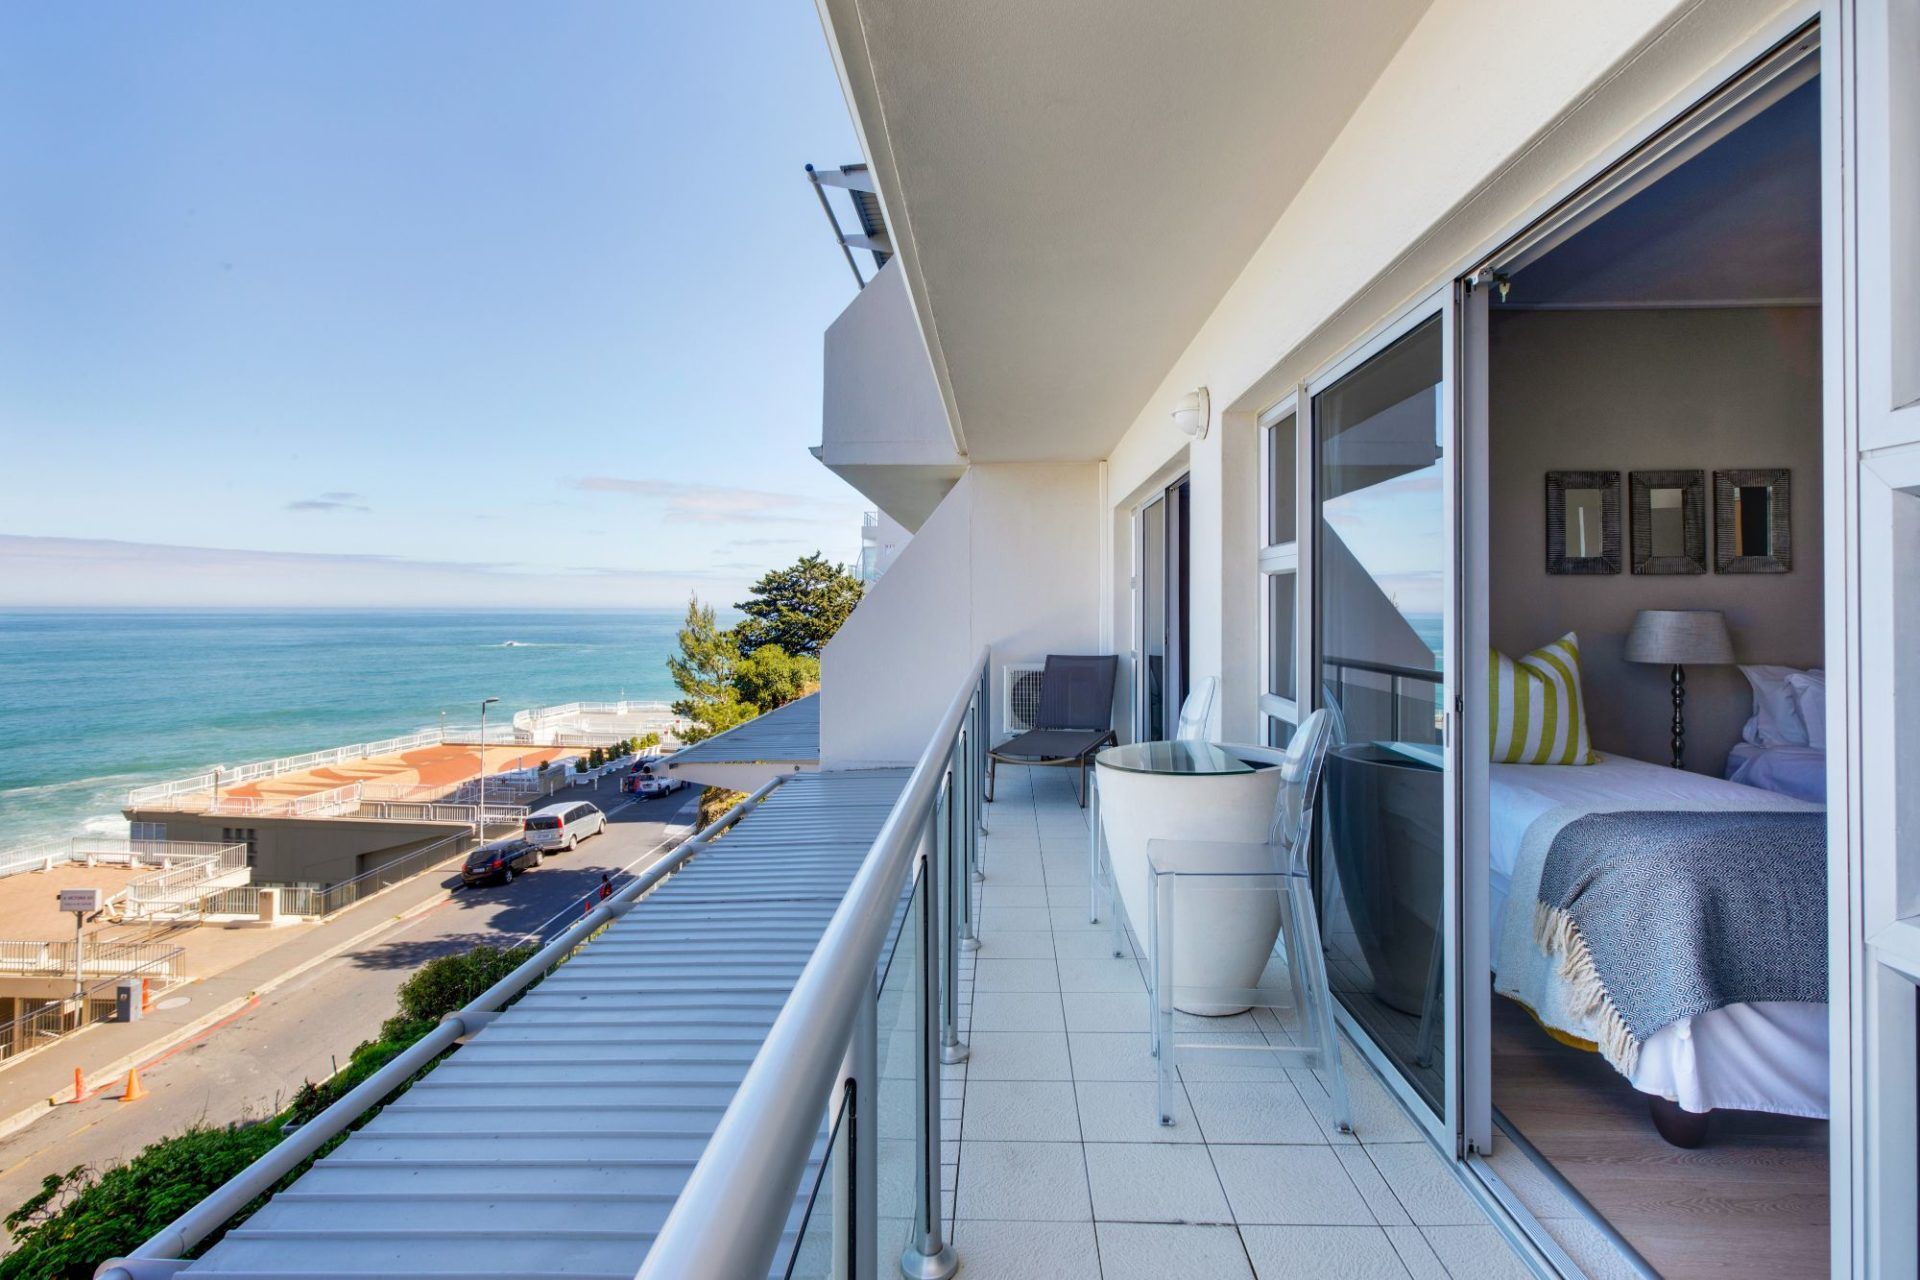 Photo 8 of Dunmore Apartment accommodation in Clifton, Cape Town with 2 bedrooms and 2 bathrooms